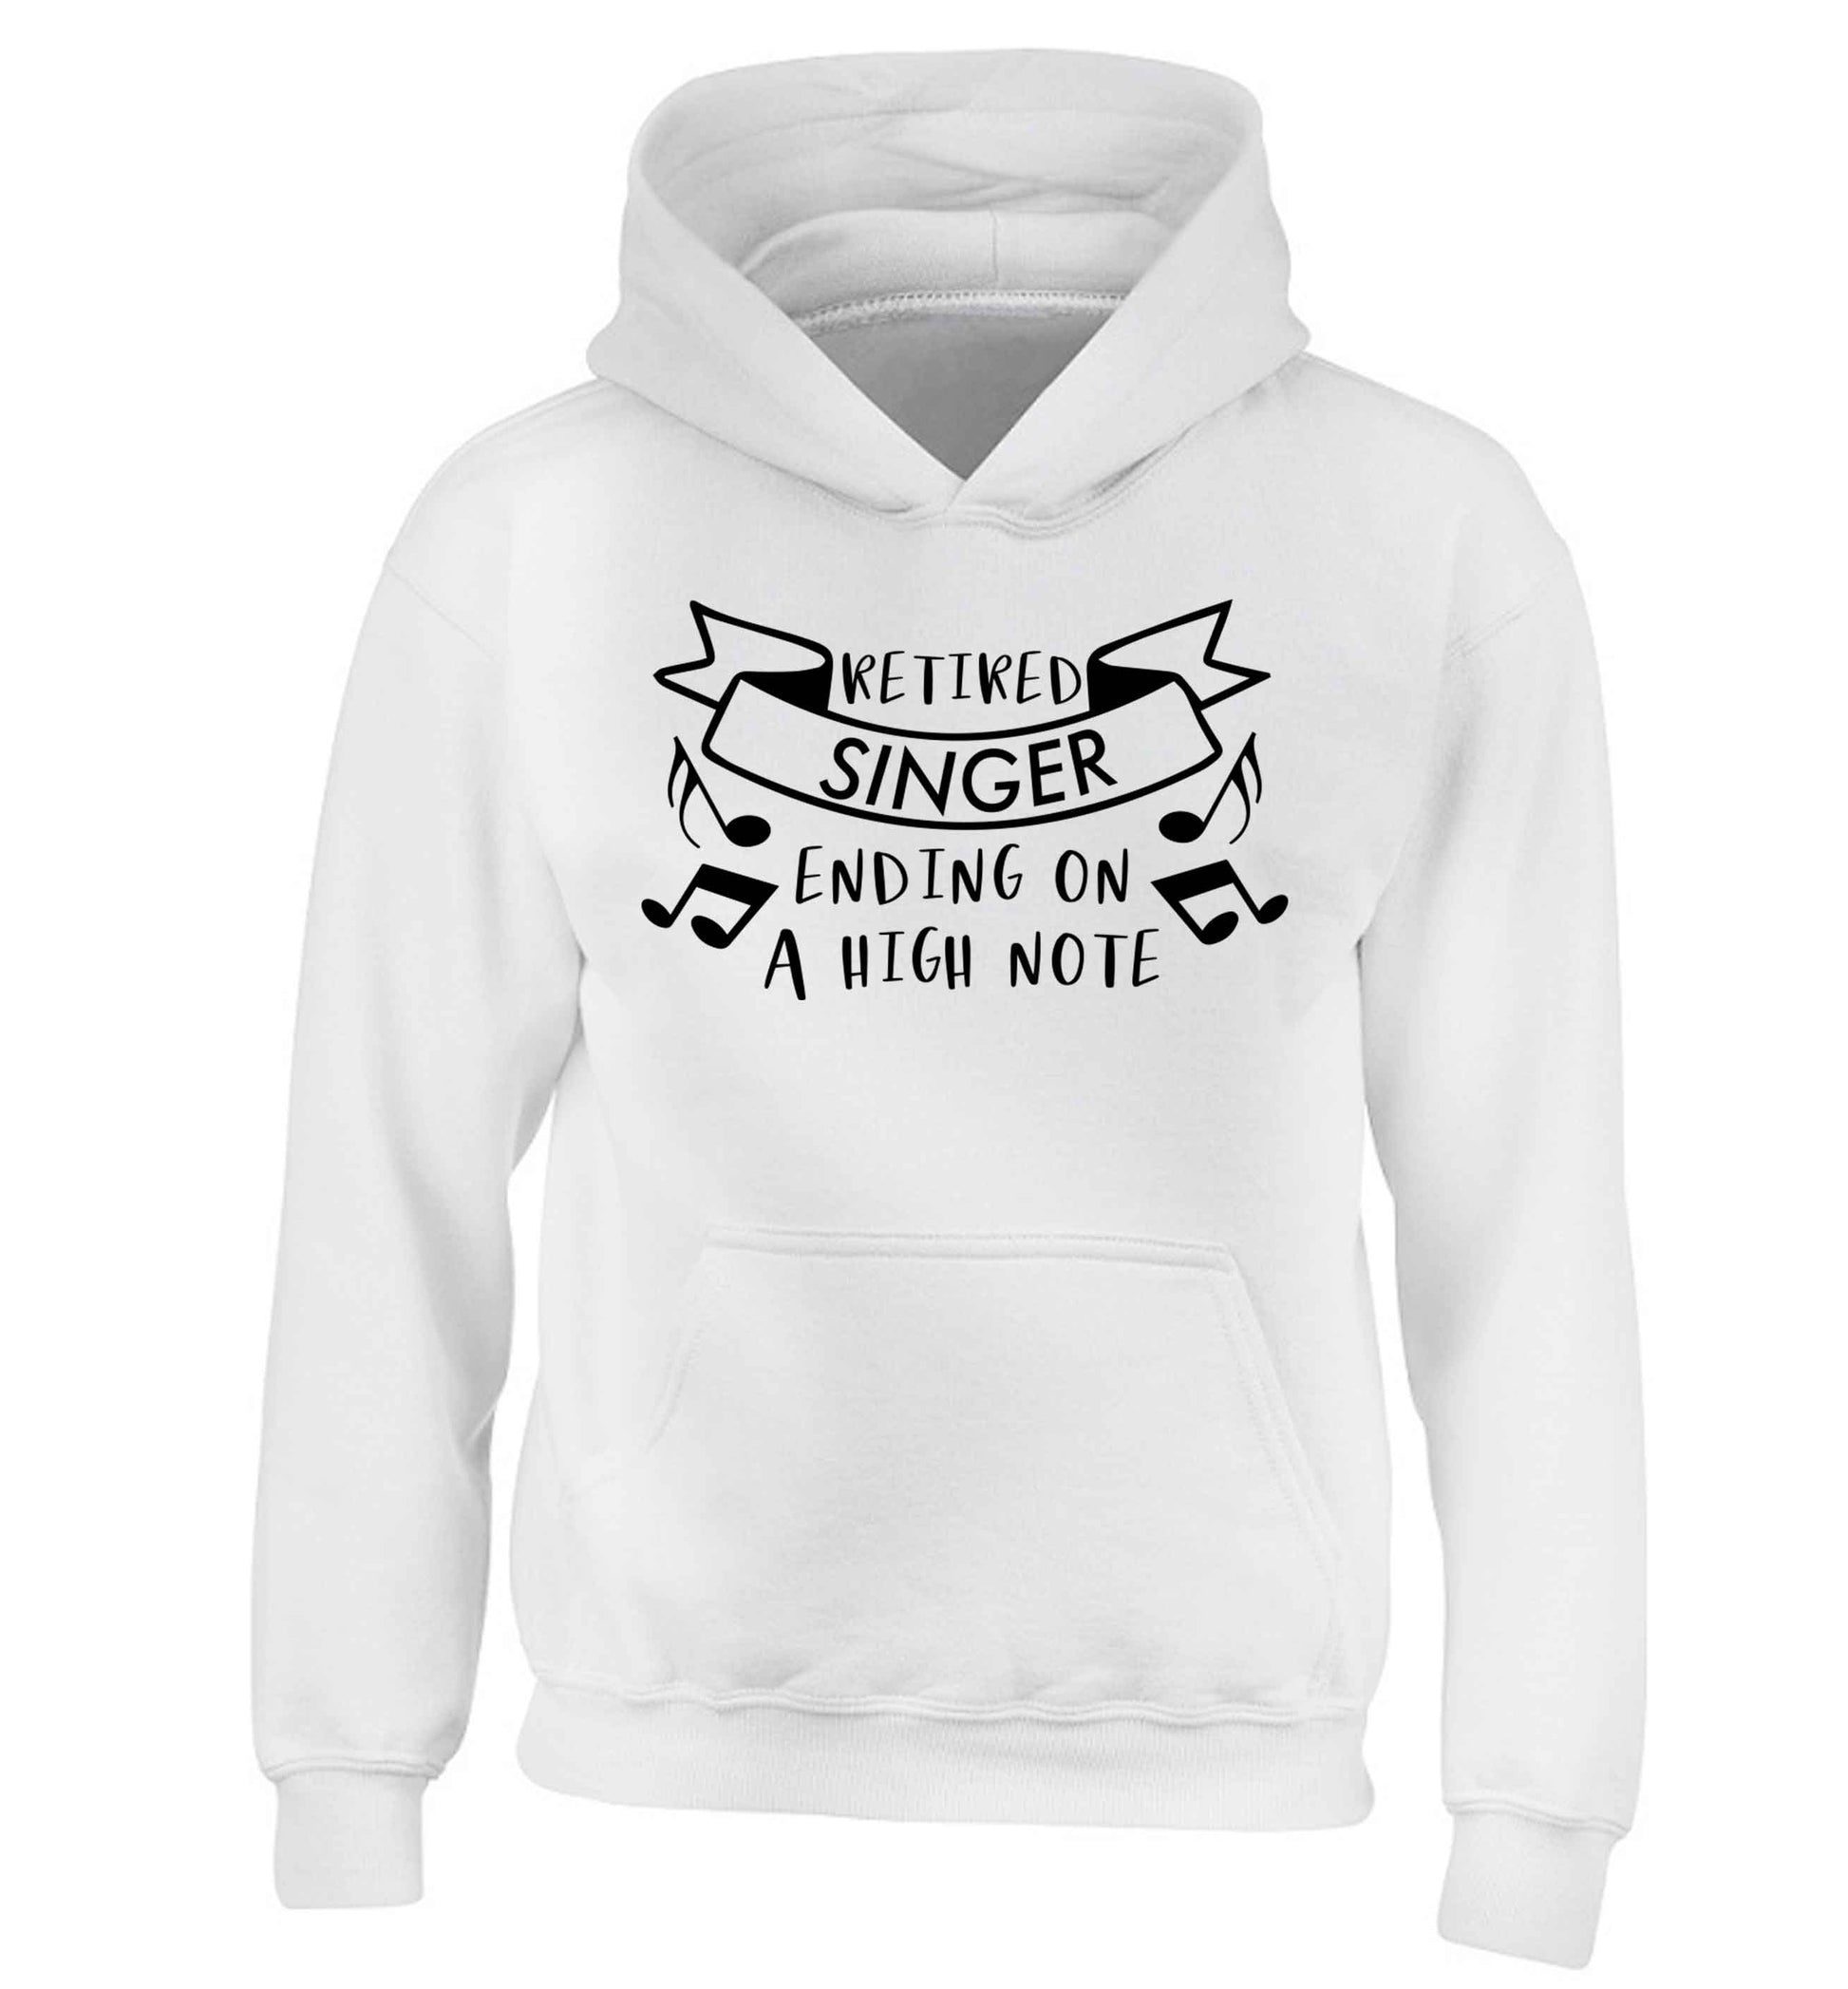 Retired singer ending on a high note children's white hoodie 12-13 Years